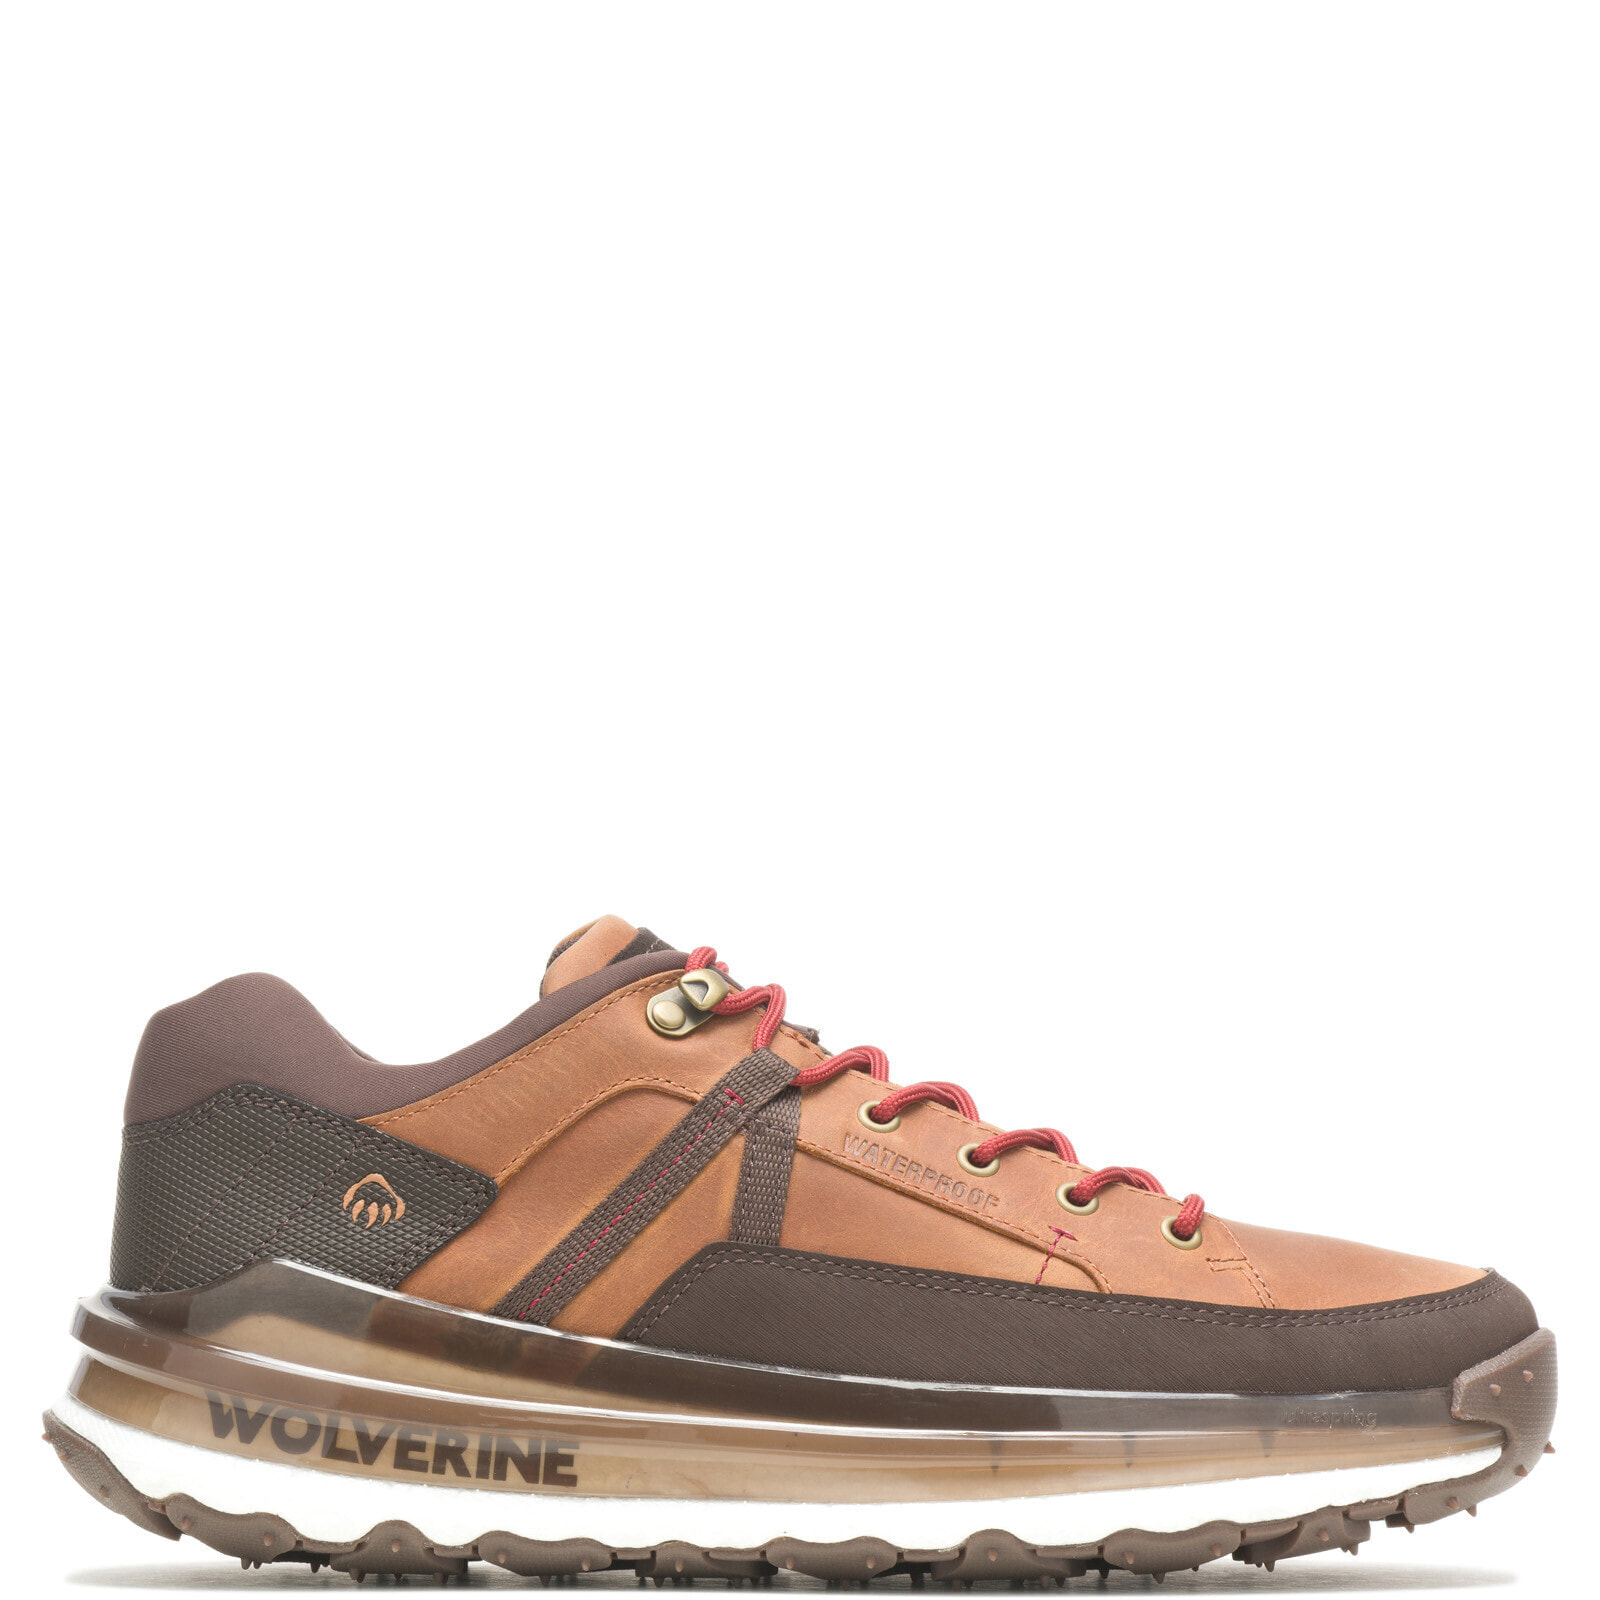 Wolverine Conquer Ultraspring WP Low Mens Brown Wide Athletic Hiking Shoes